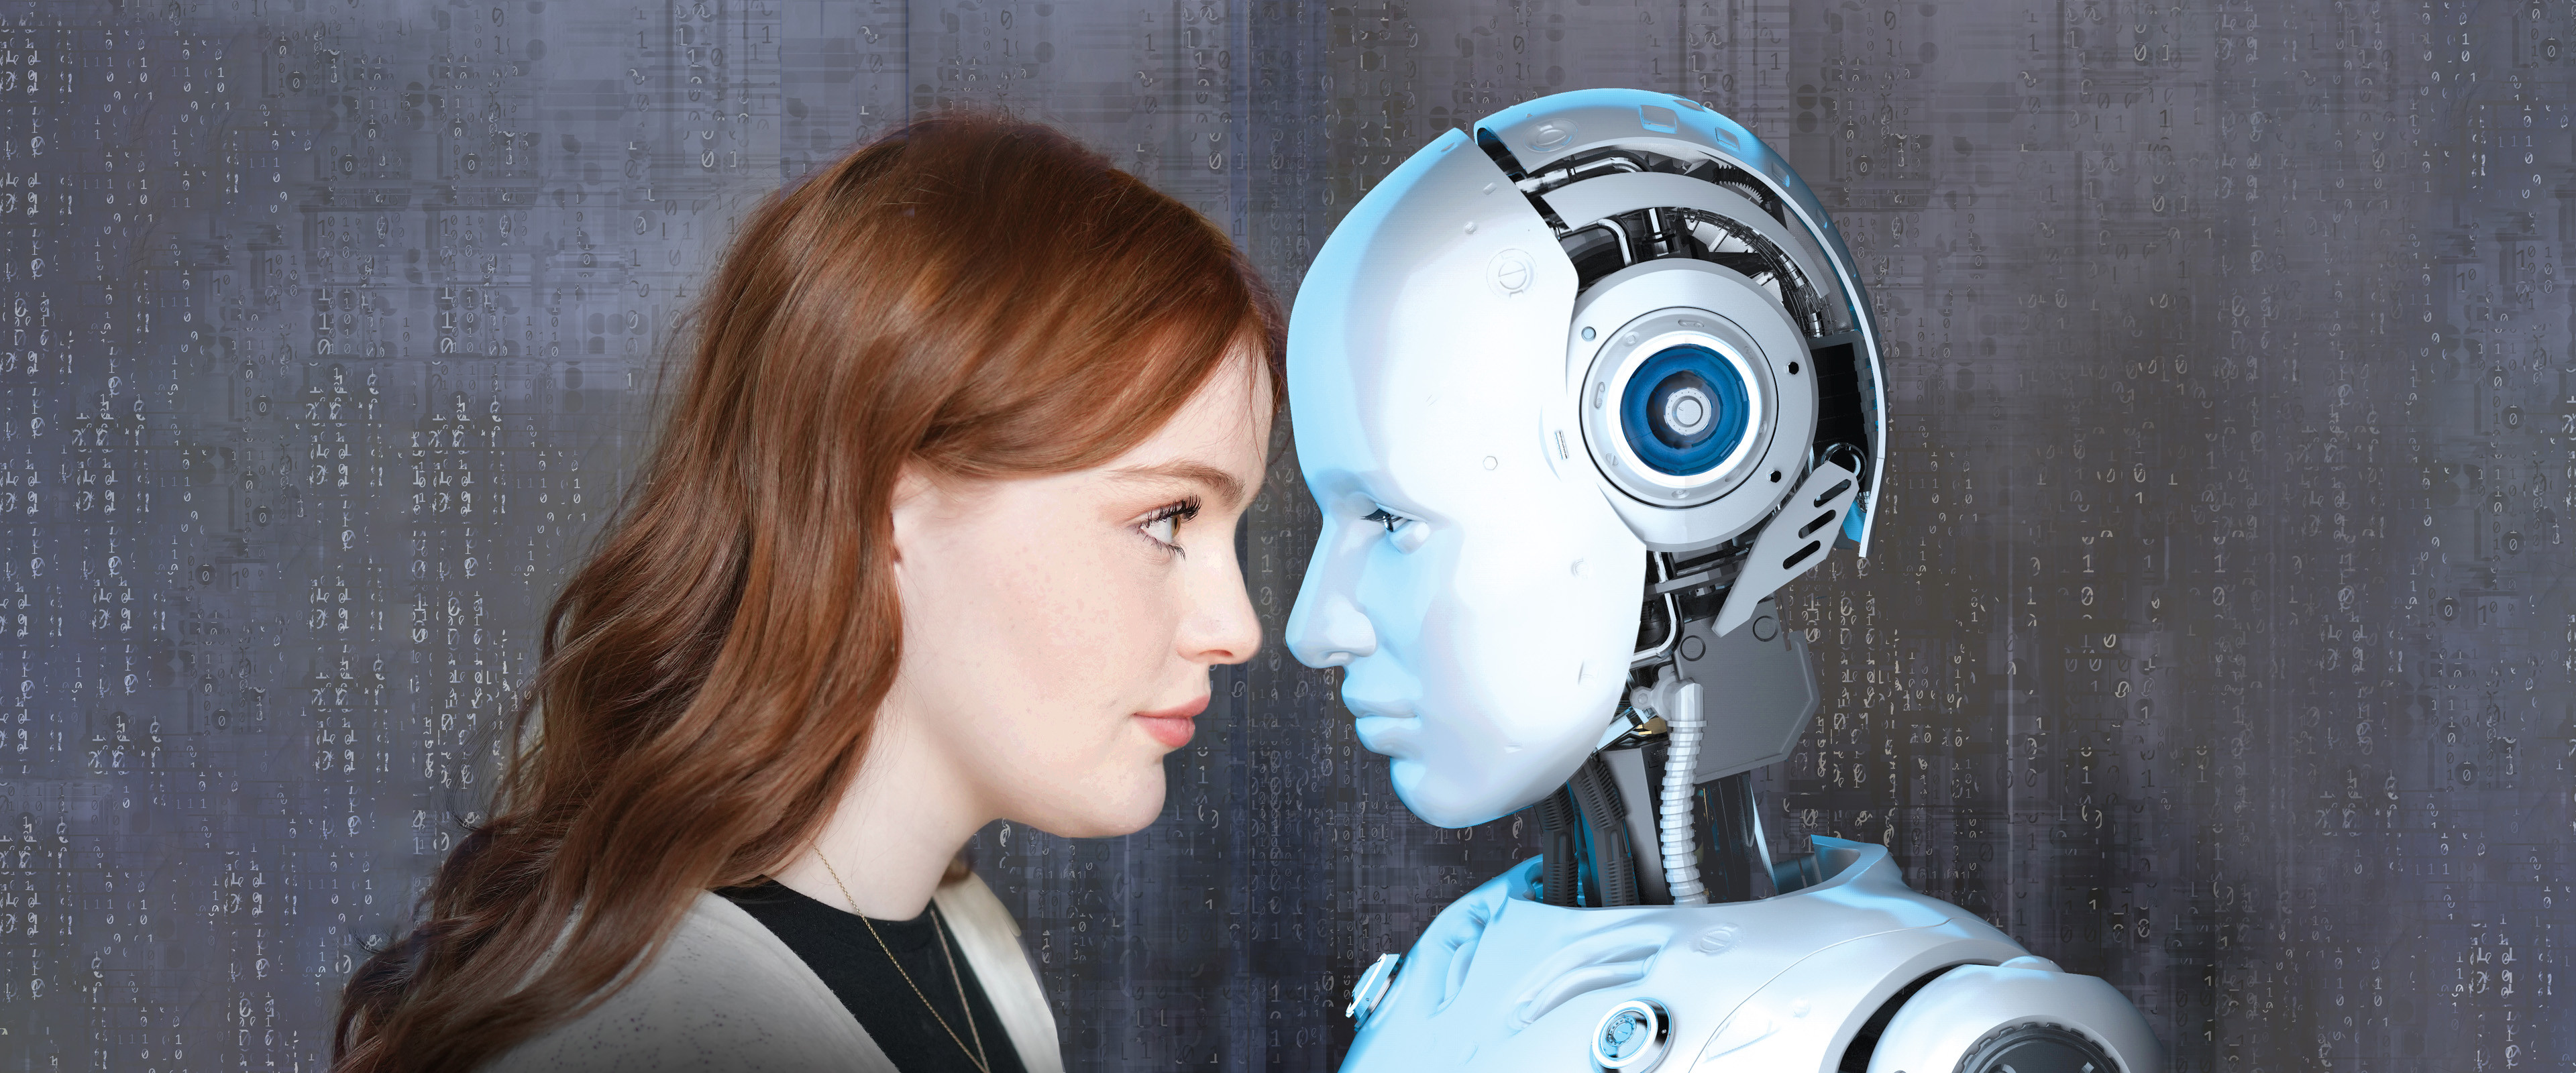 A profile shot of a human face and a robot face nose to nose.